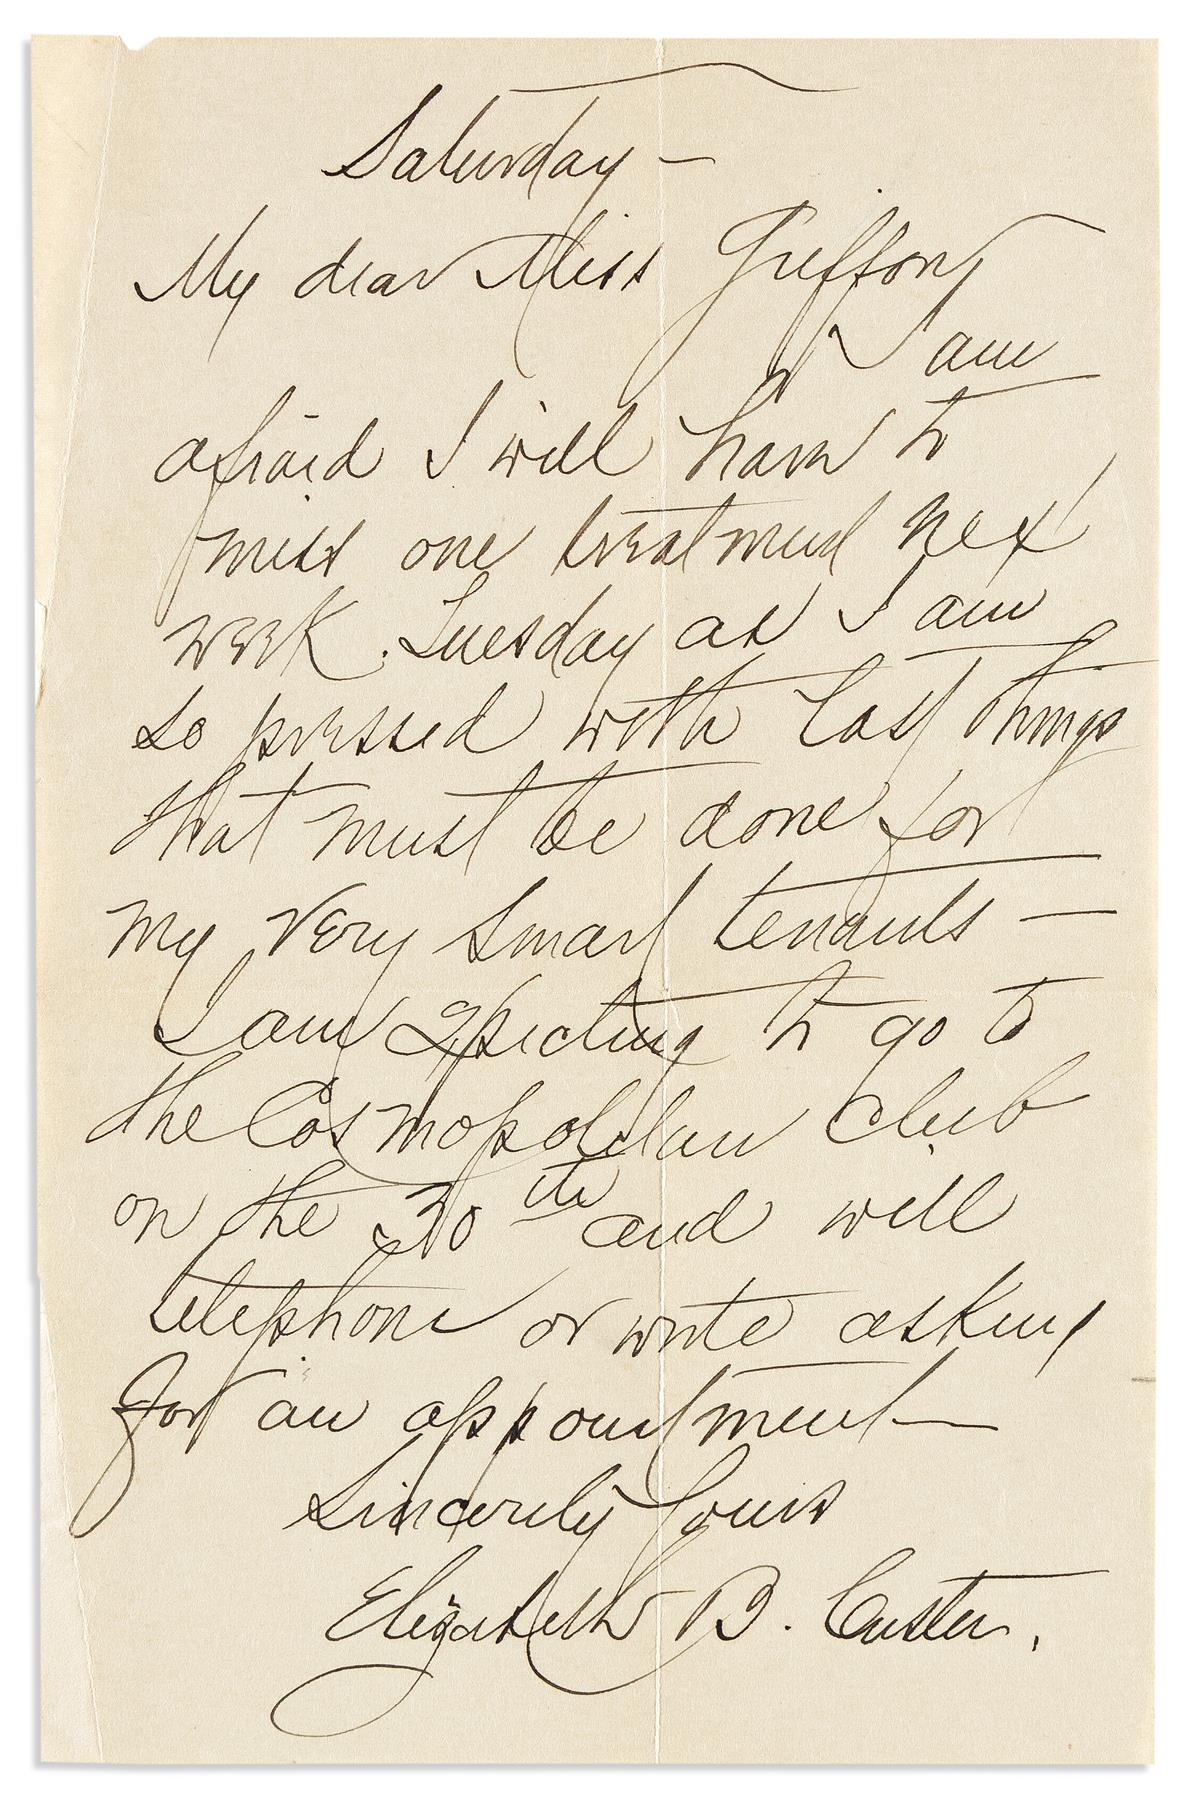 CUSTER, ELIZABETH BACON. Group of 4 items, each Signed and Inscribed, to Olive Griffin, in ink or pencil: Two Autograph Letters * Autog